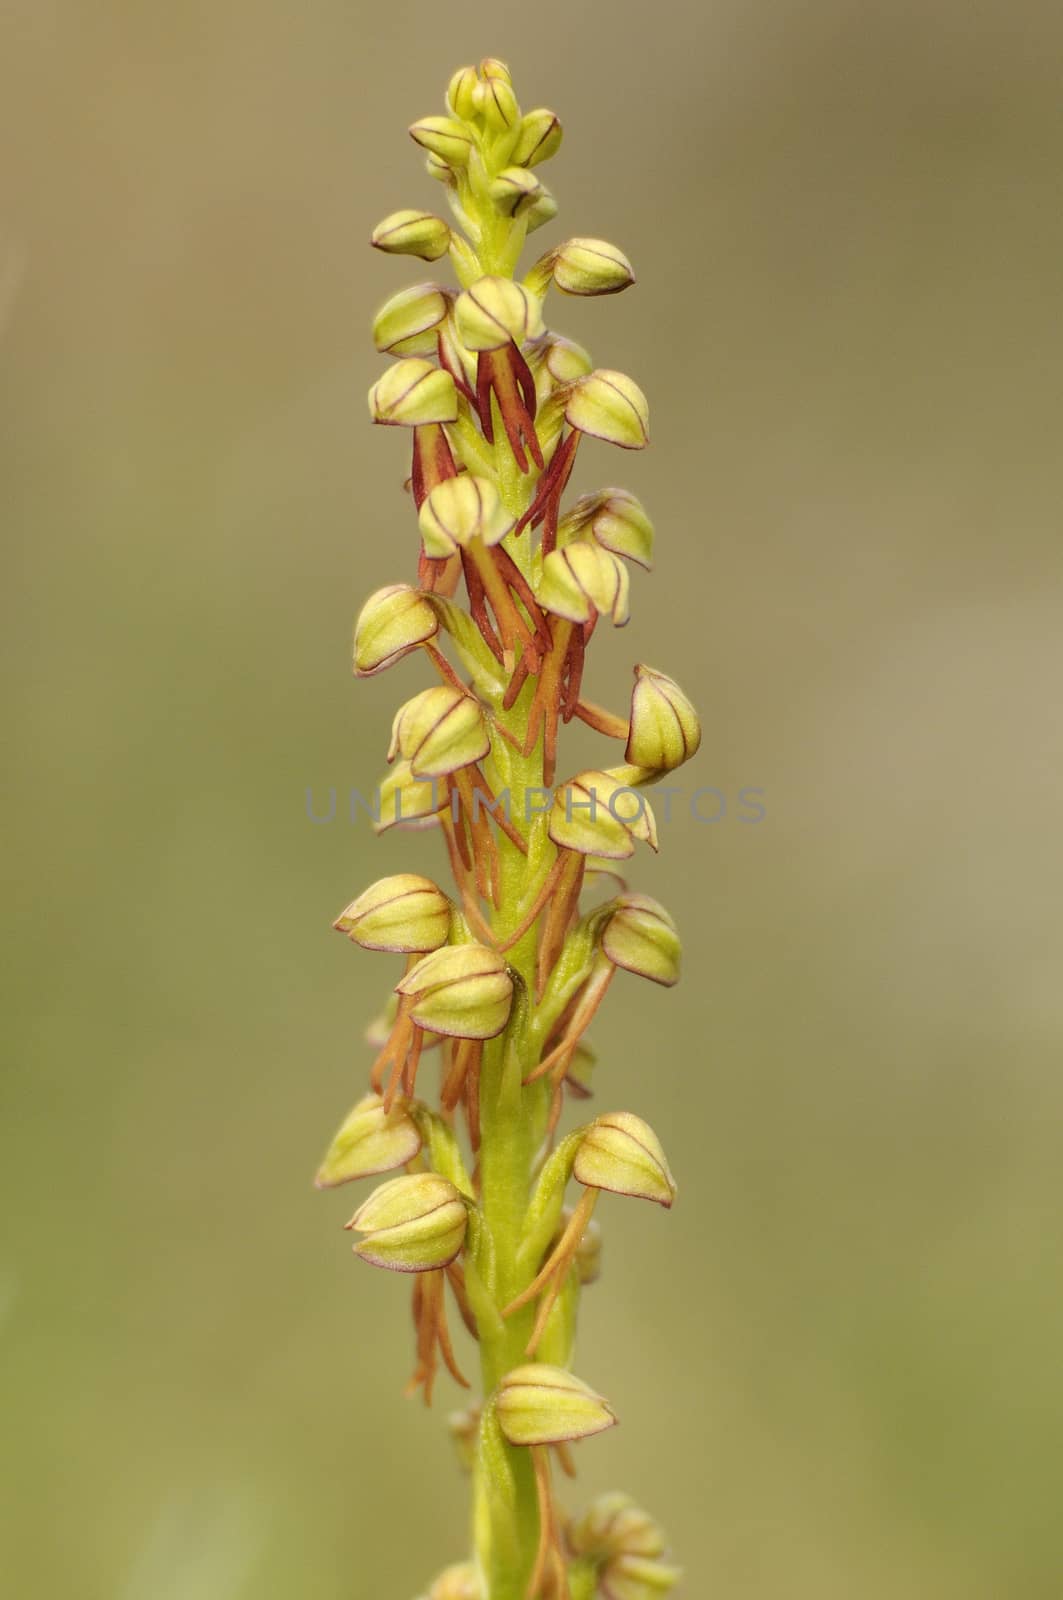 Wild orchid from southern Western Europe, Orchis anthropophora,  by jalonsohu@gmail.com